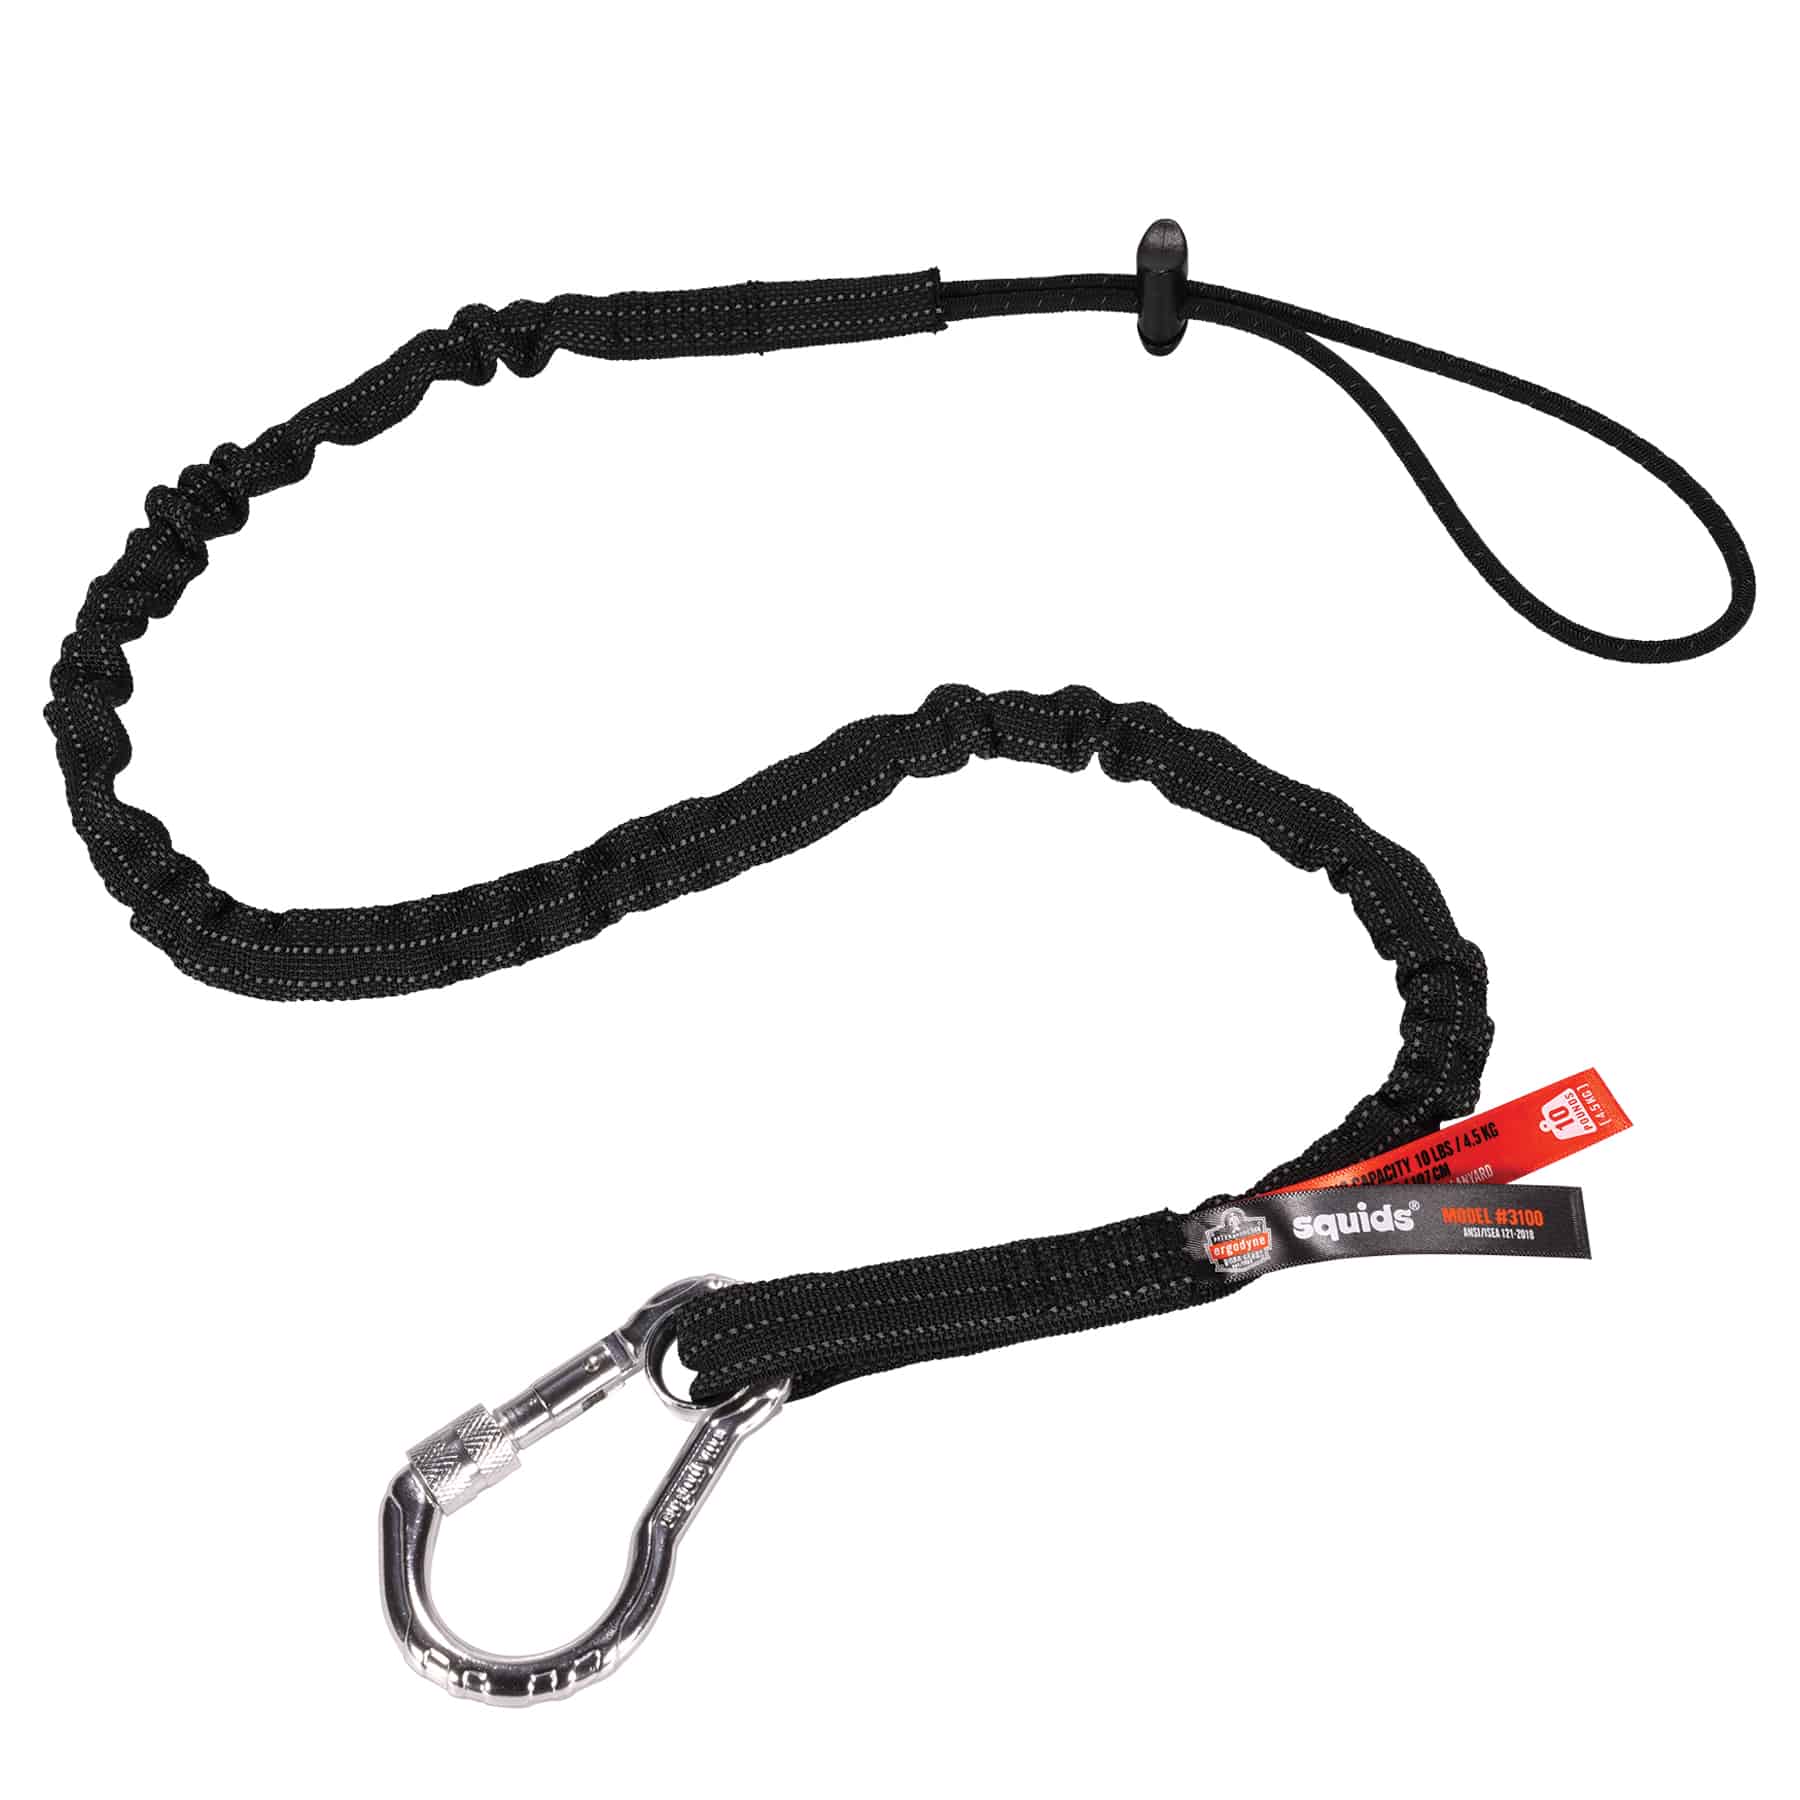 Retractable Tool Lanyard Anti-Falling Safety Lanyard Adjustable Rope With  Carabiner For Climbing Working